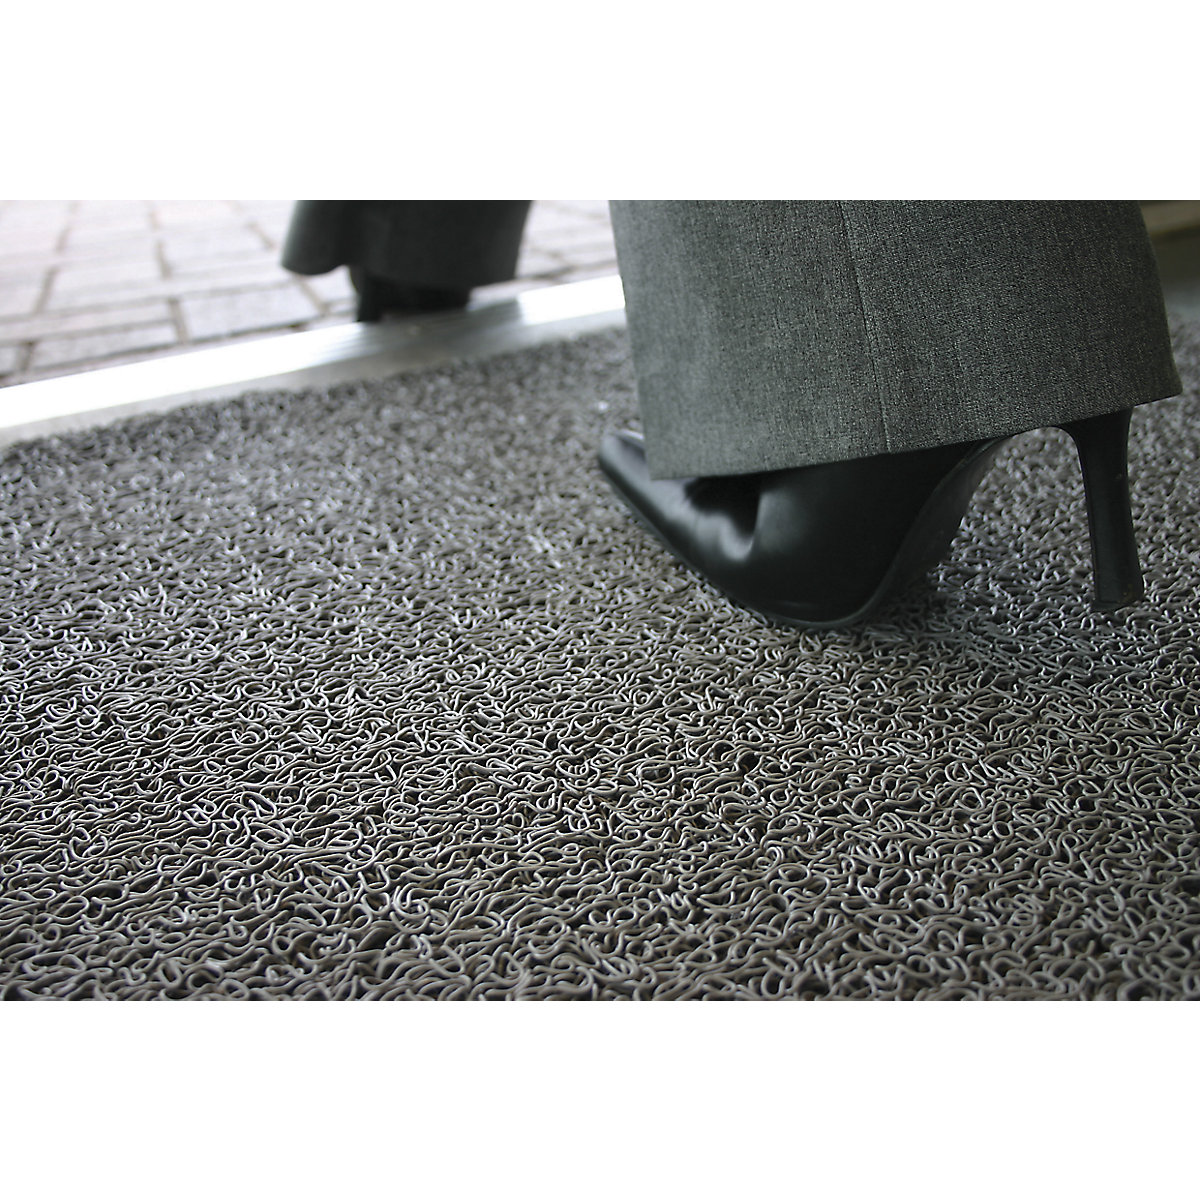 Entrance matting, flame resistant, width 900 mm, sold by the metre, grey